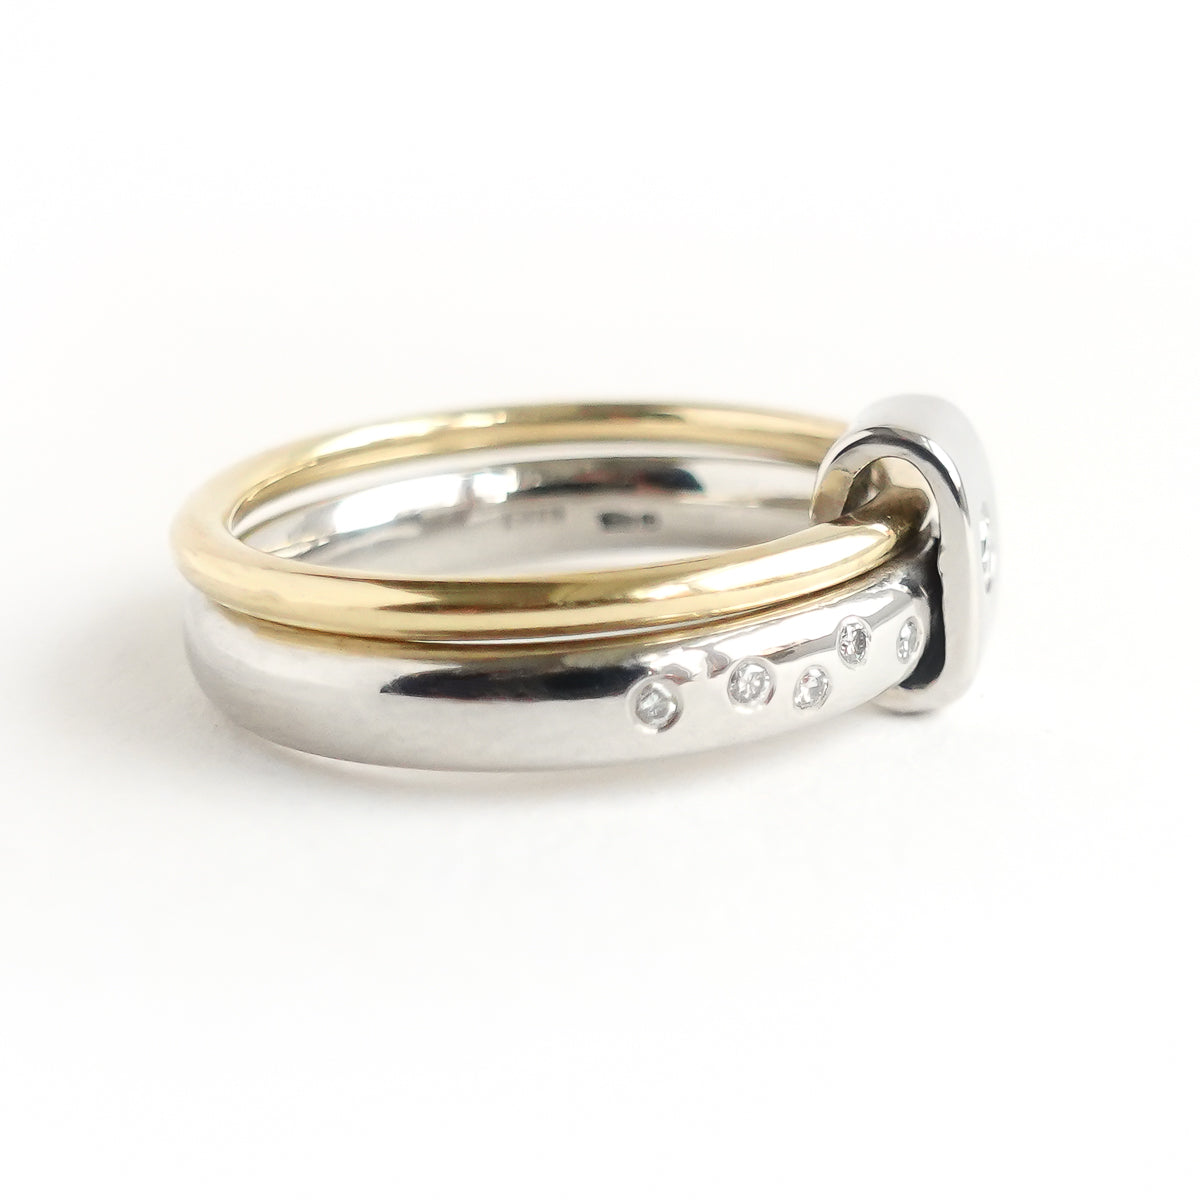 Contemporary platinum and 18ct yellow gold two band ring with diamonds